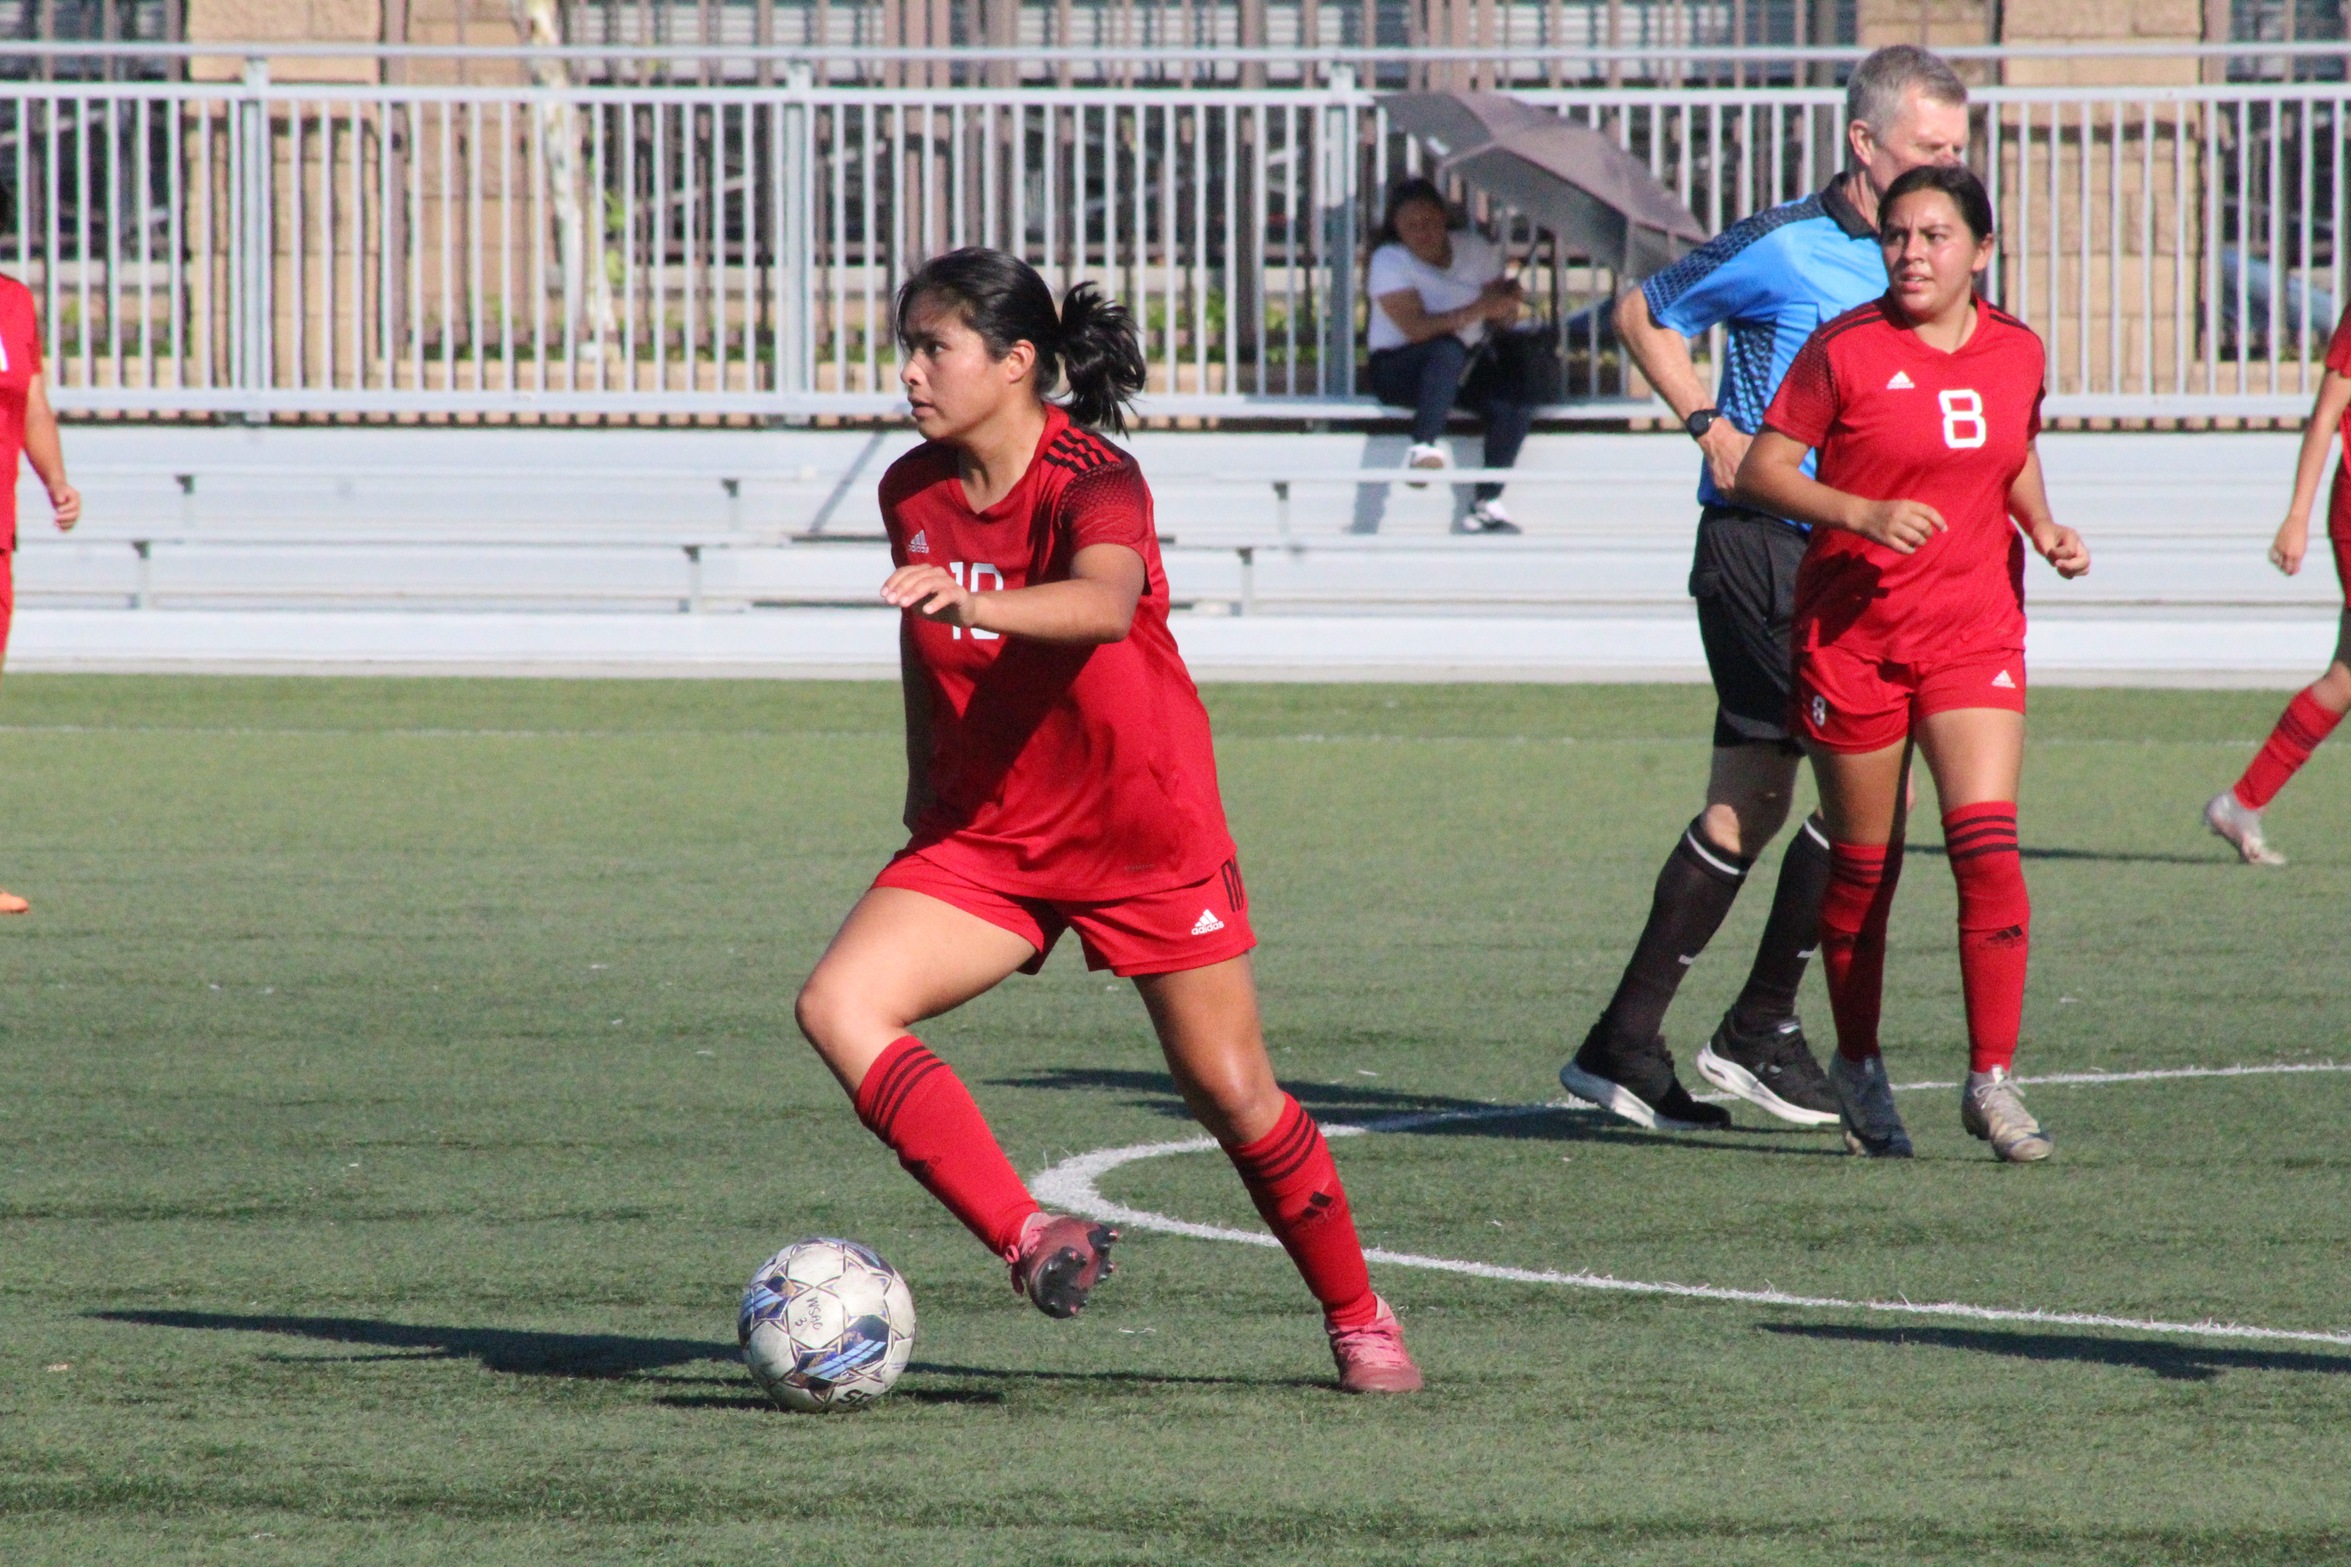 Dons Fall 4-1, Set to Face Irvine Valley on Friday